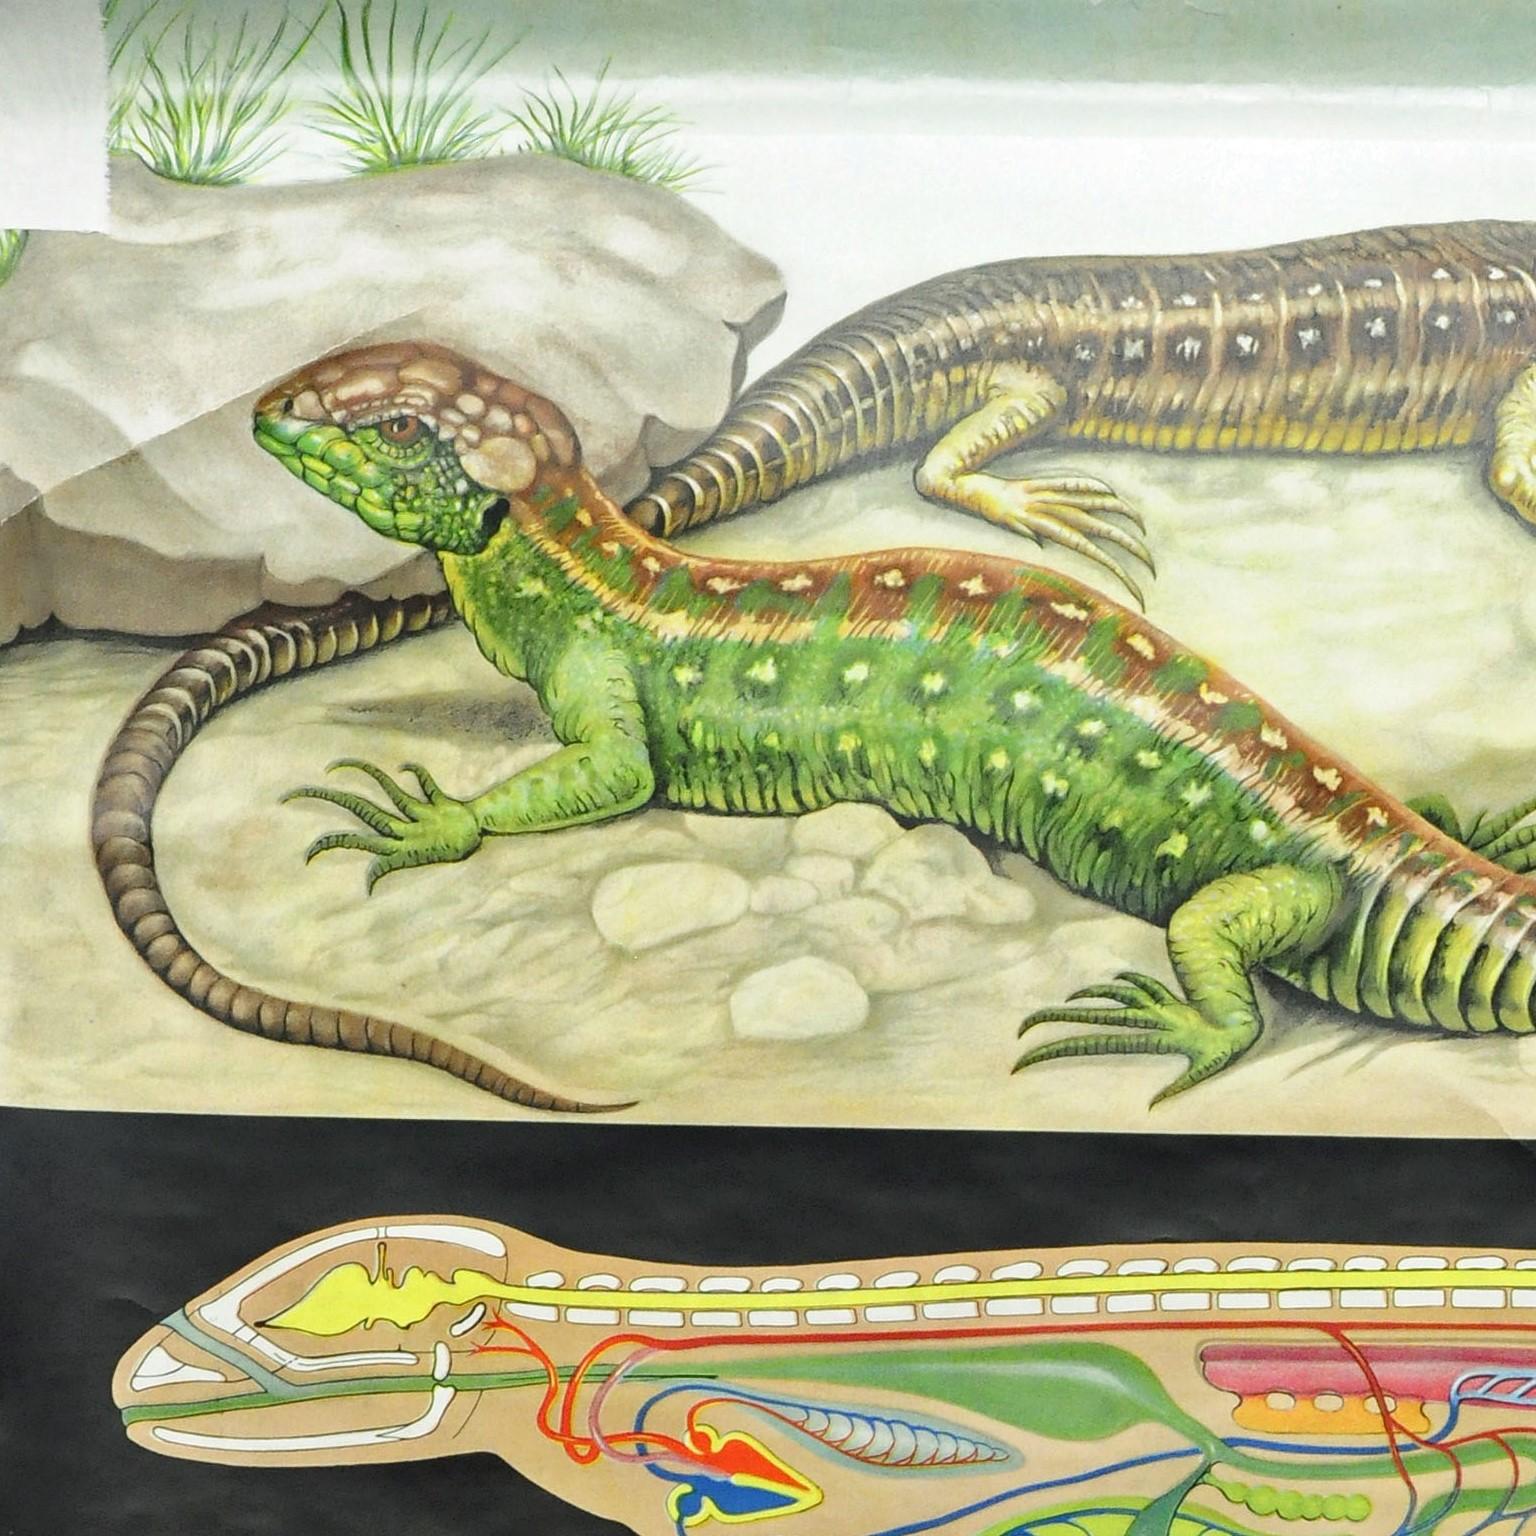 The countrylife vintage pull-down wall chart by the artist group of Jung Koch Quentell is showing a sand lizard, Lacerta agilis. Colorful print on paper reinforced with canvas. Published by Hagemann, Dusseldorf. A great wall decoration for all